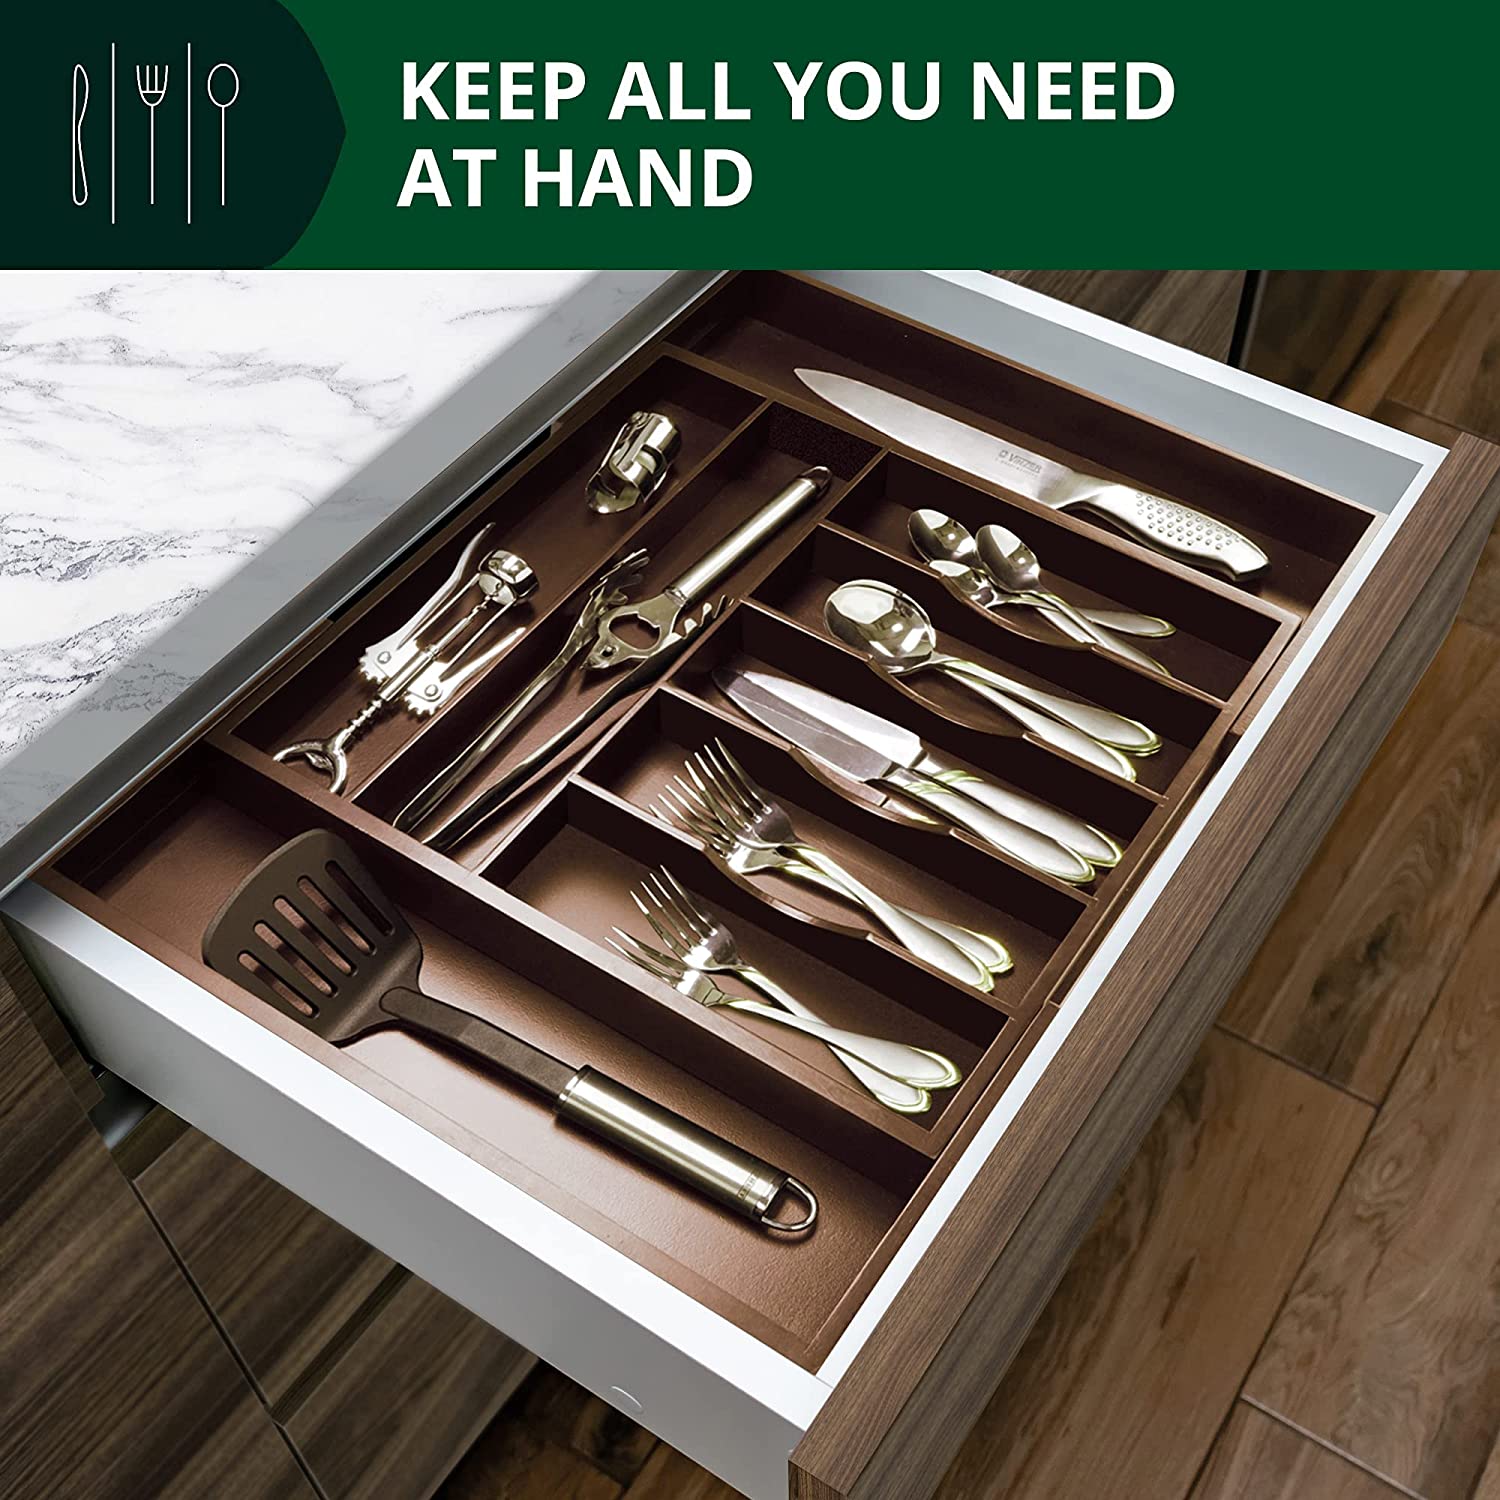 Royal Craft Wood Luxury Bamboo Kitchen Drawer Organizer and Expandable Utensil Organizer, Silverware Holder and Cutlery Tray for Kitchen